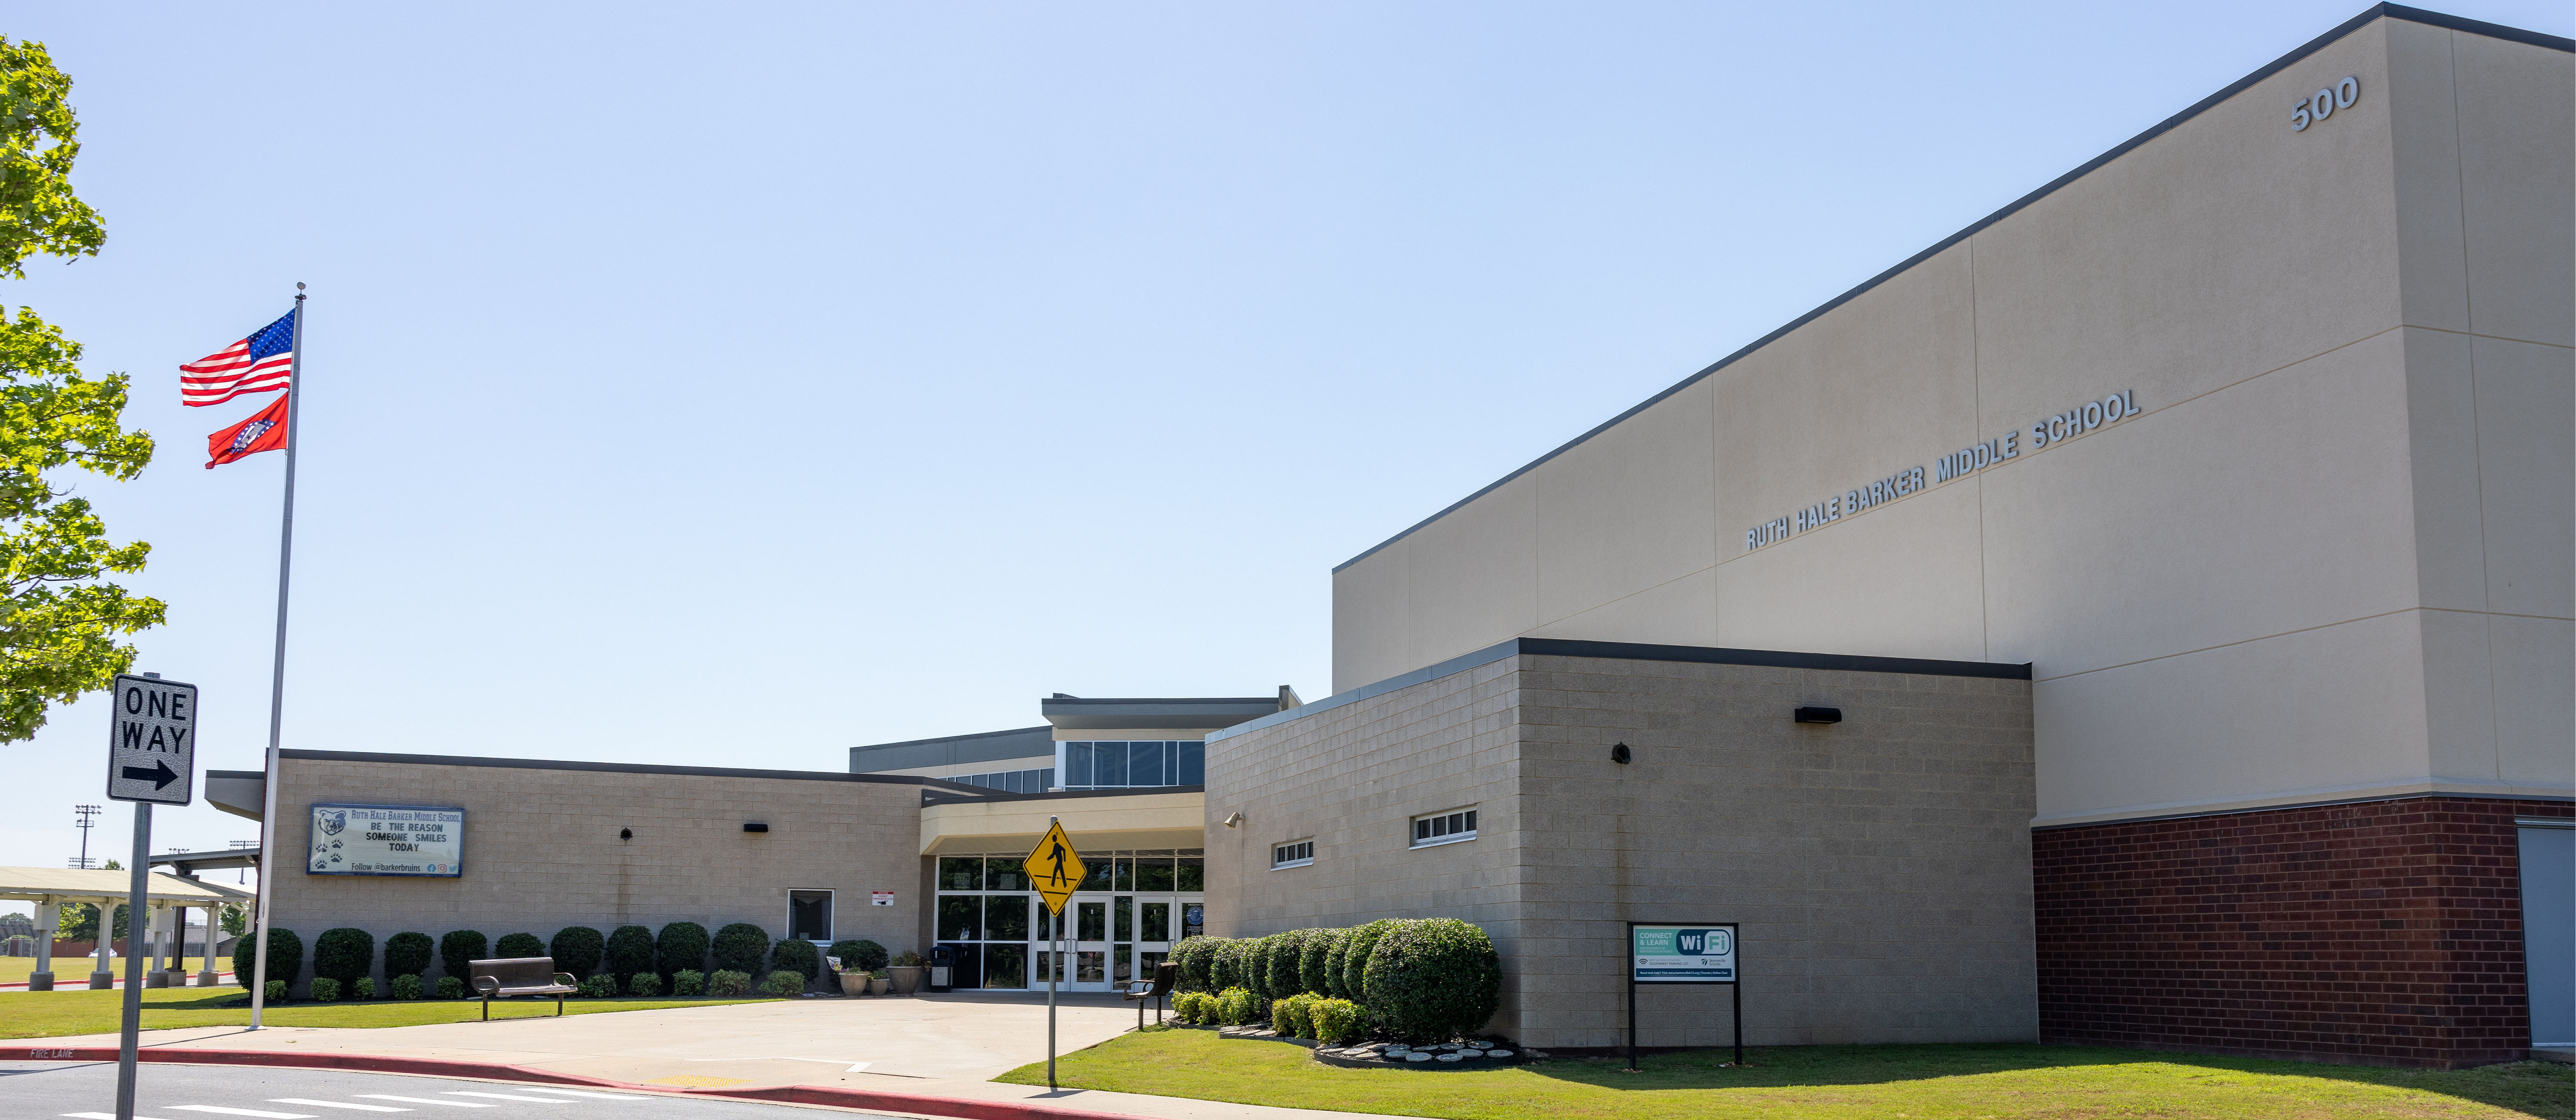 Ruth Barker Middle School panorama